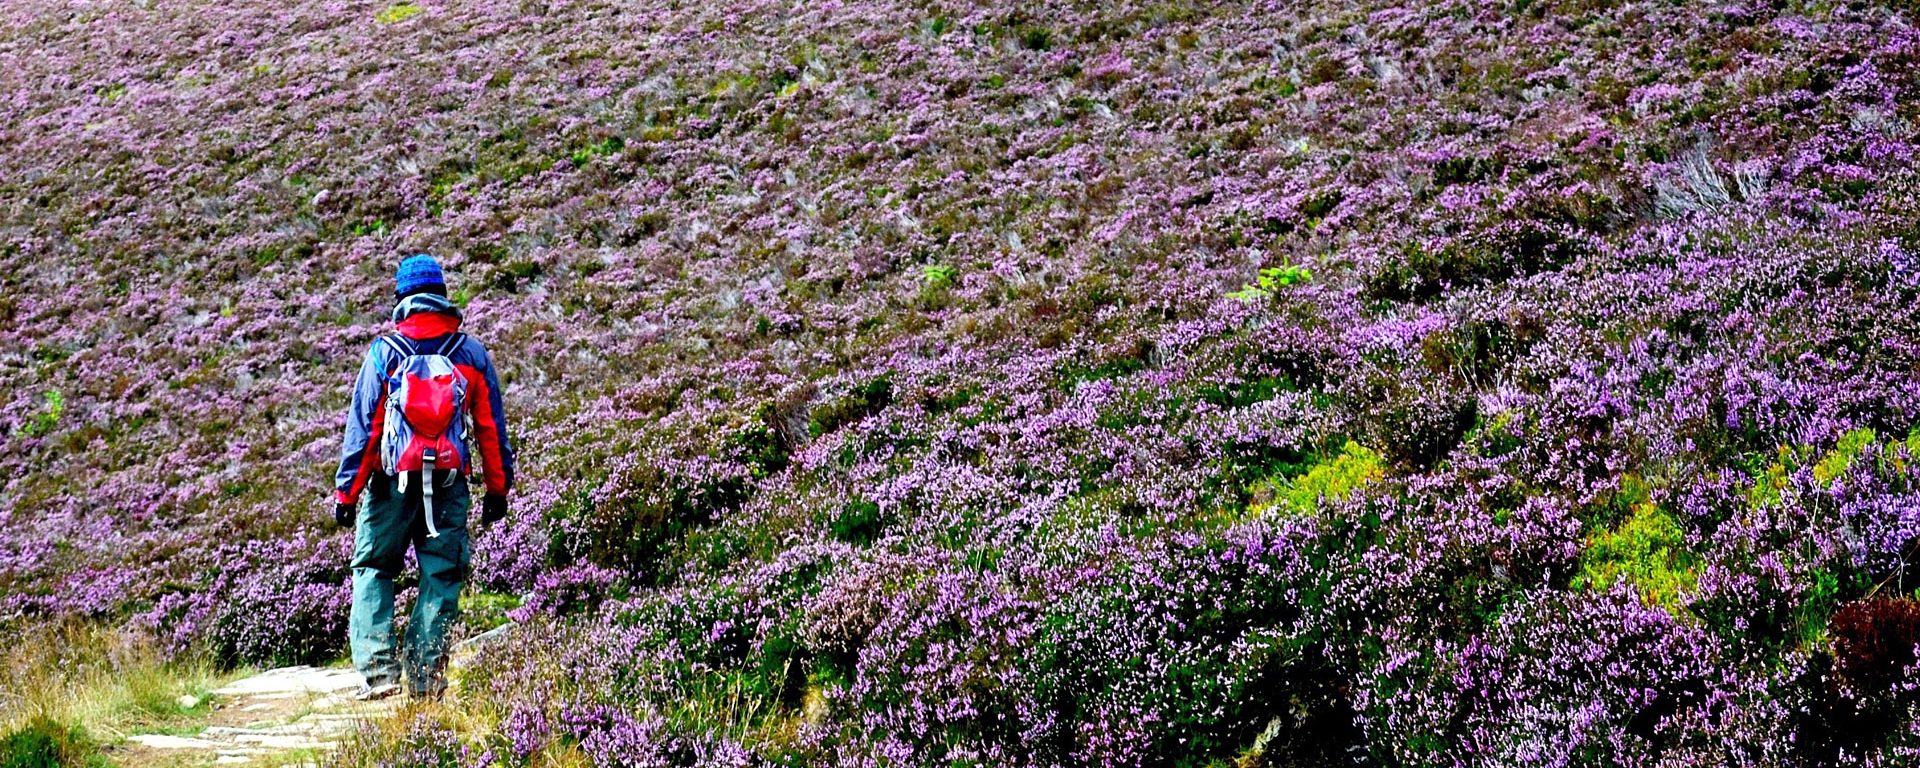 Man hiking through field of flowers in the Cairngorms, Scotland